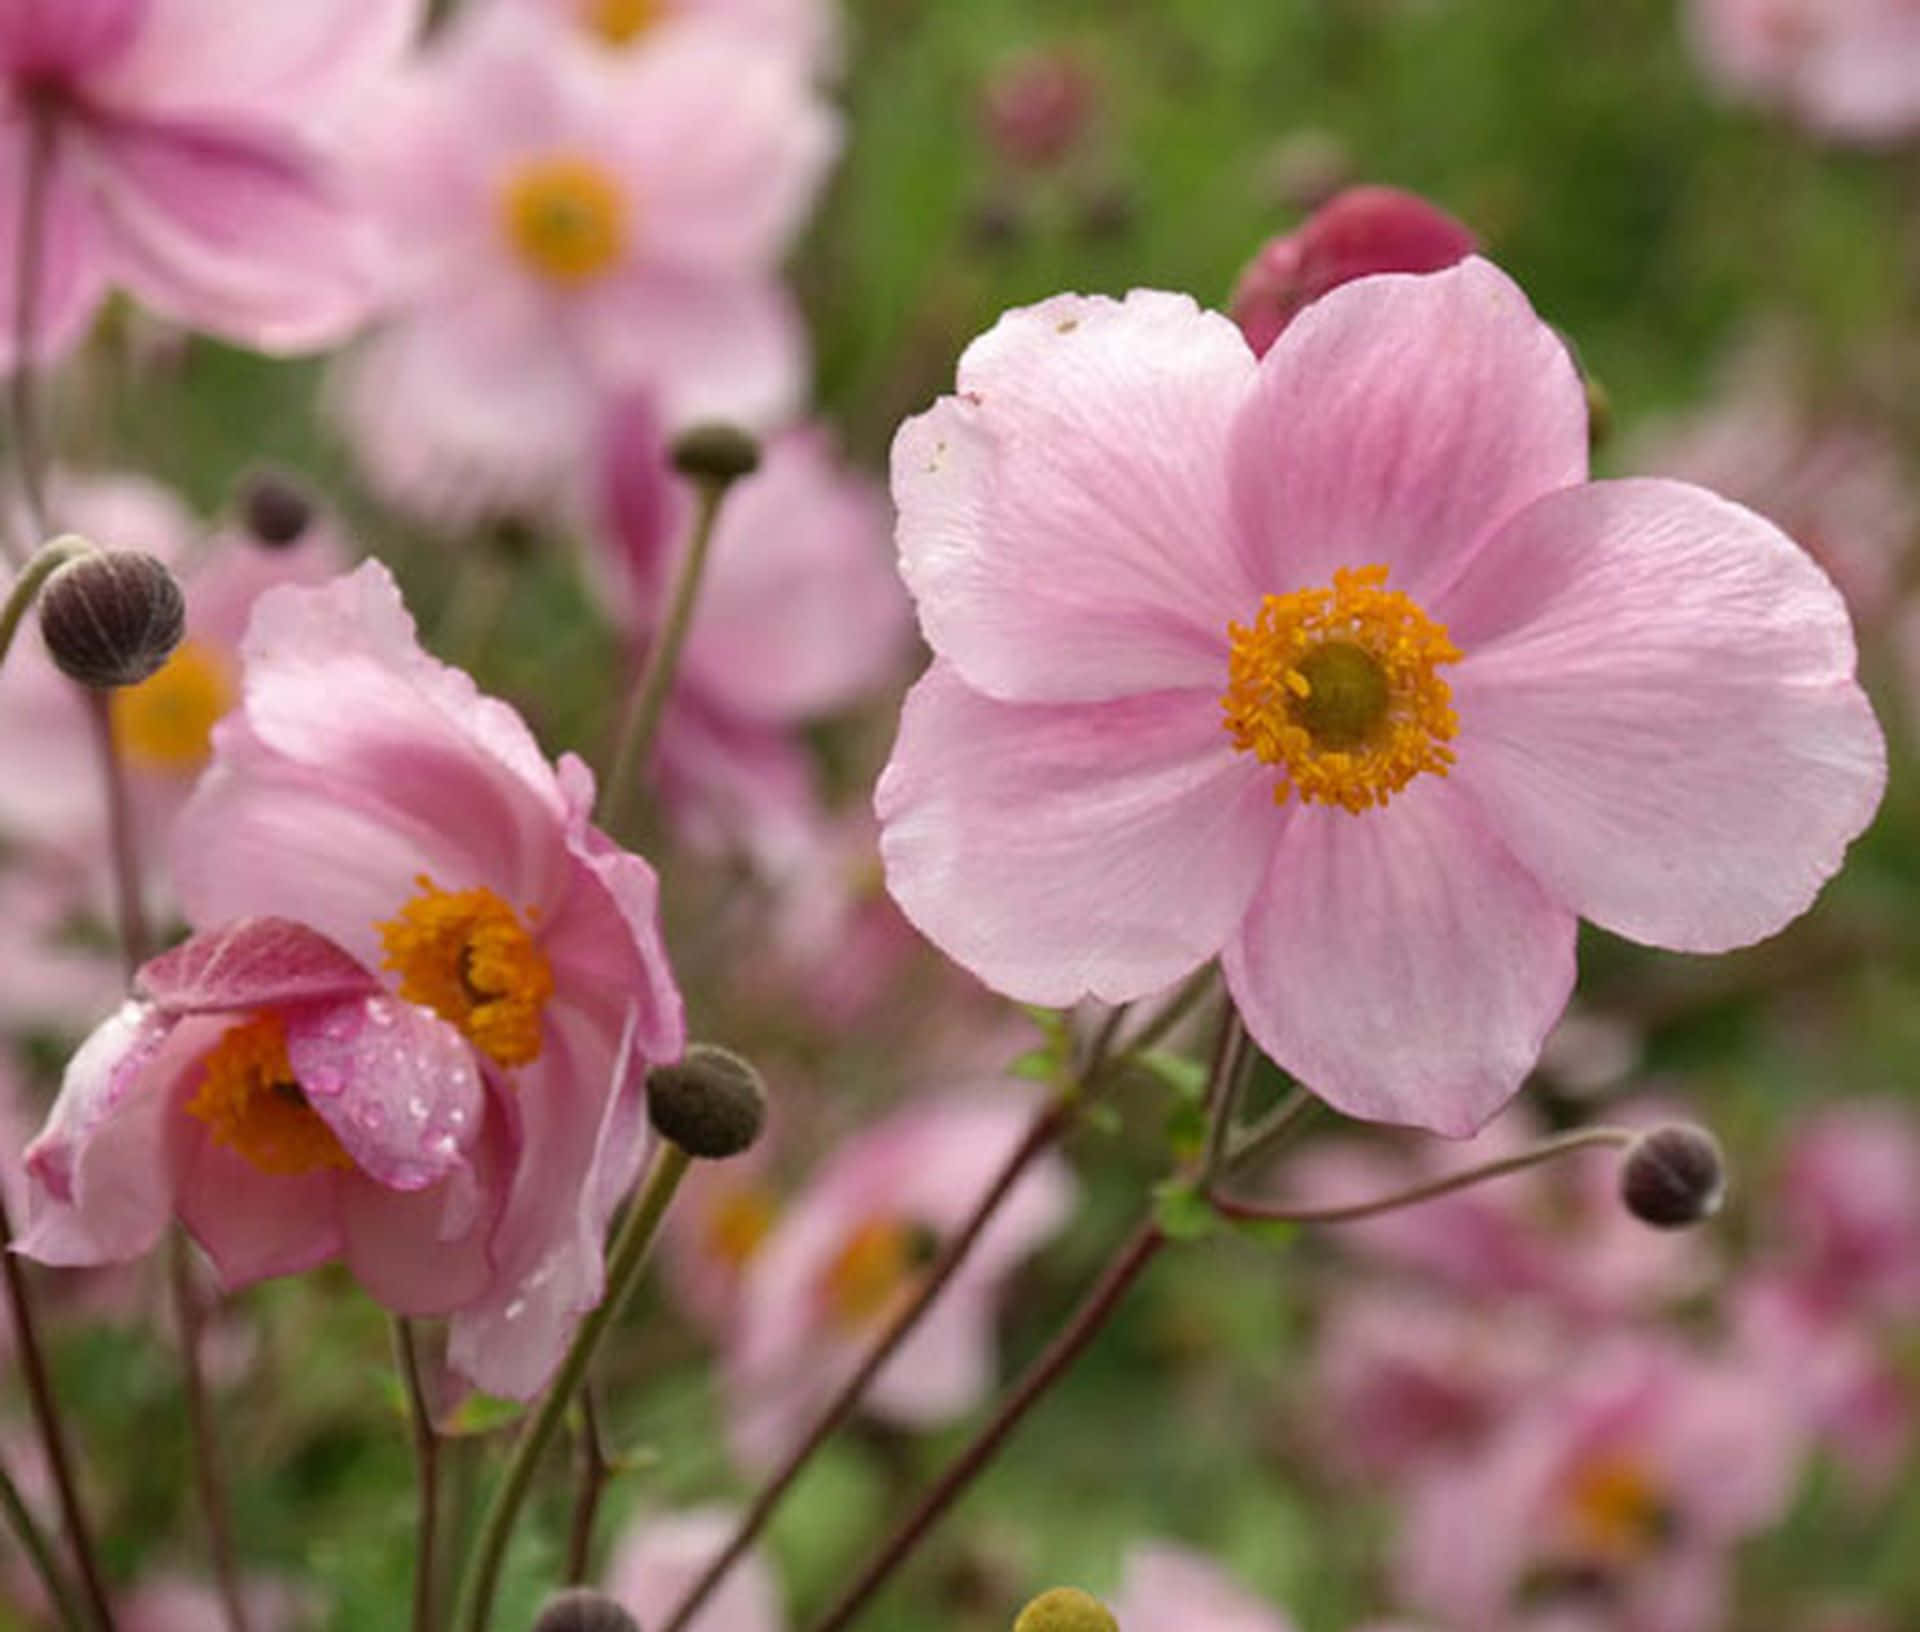 A single pink anemone flower blooms in the sunshine surrounded by lush green grass.